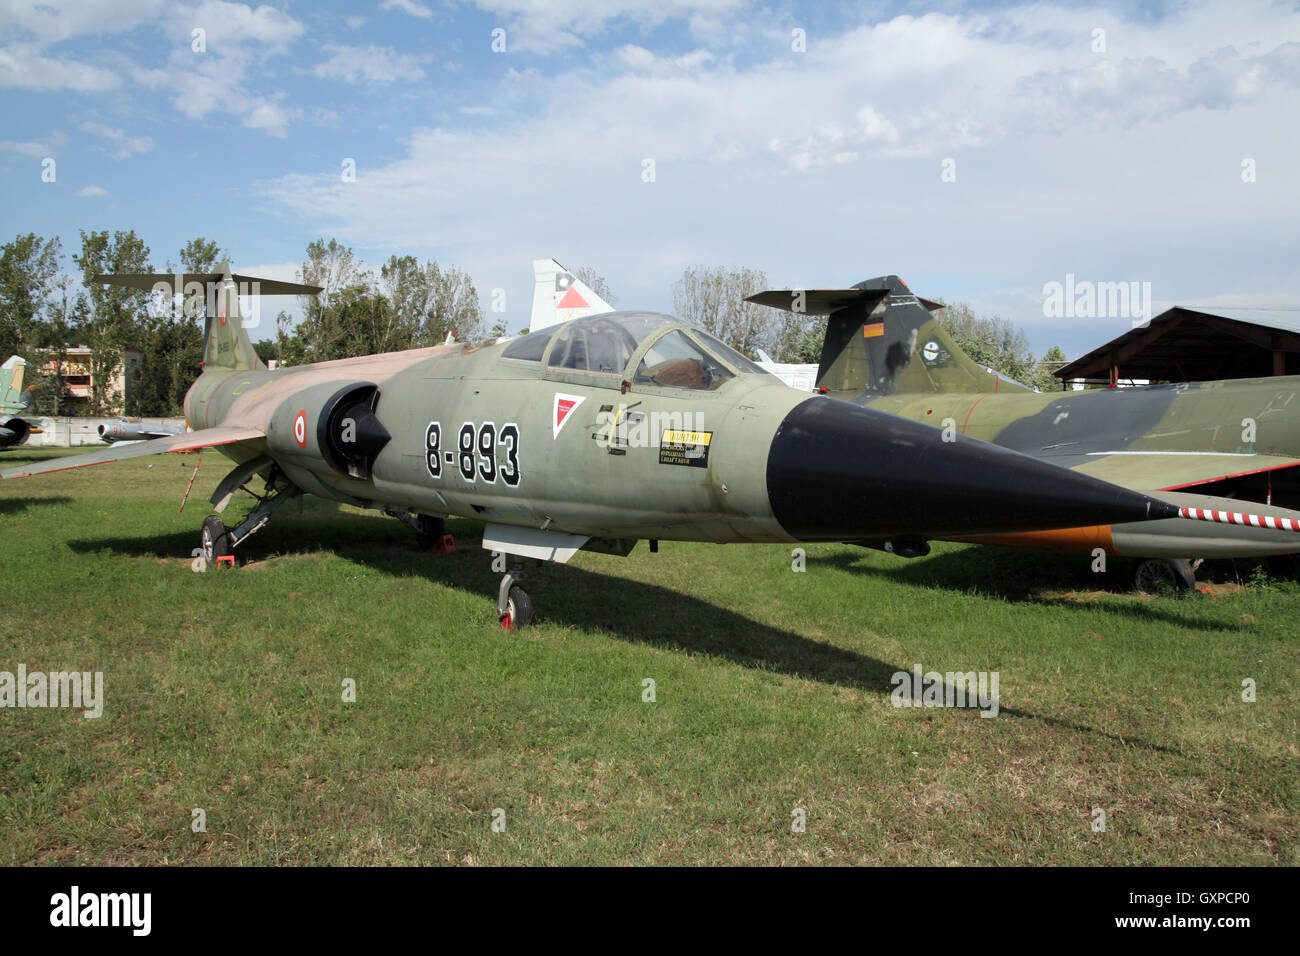 Turkish Air Force F-104 Starfighter on display in the Szolnok Aviation Museum, Hungary Stock Photo